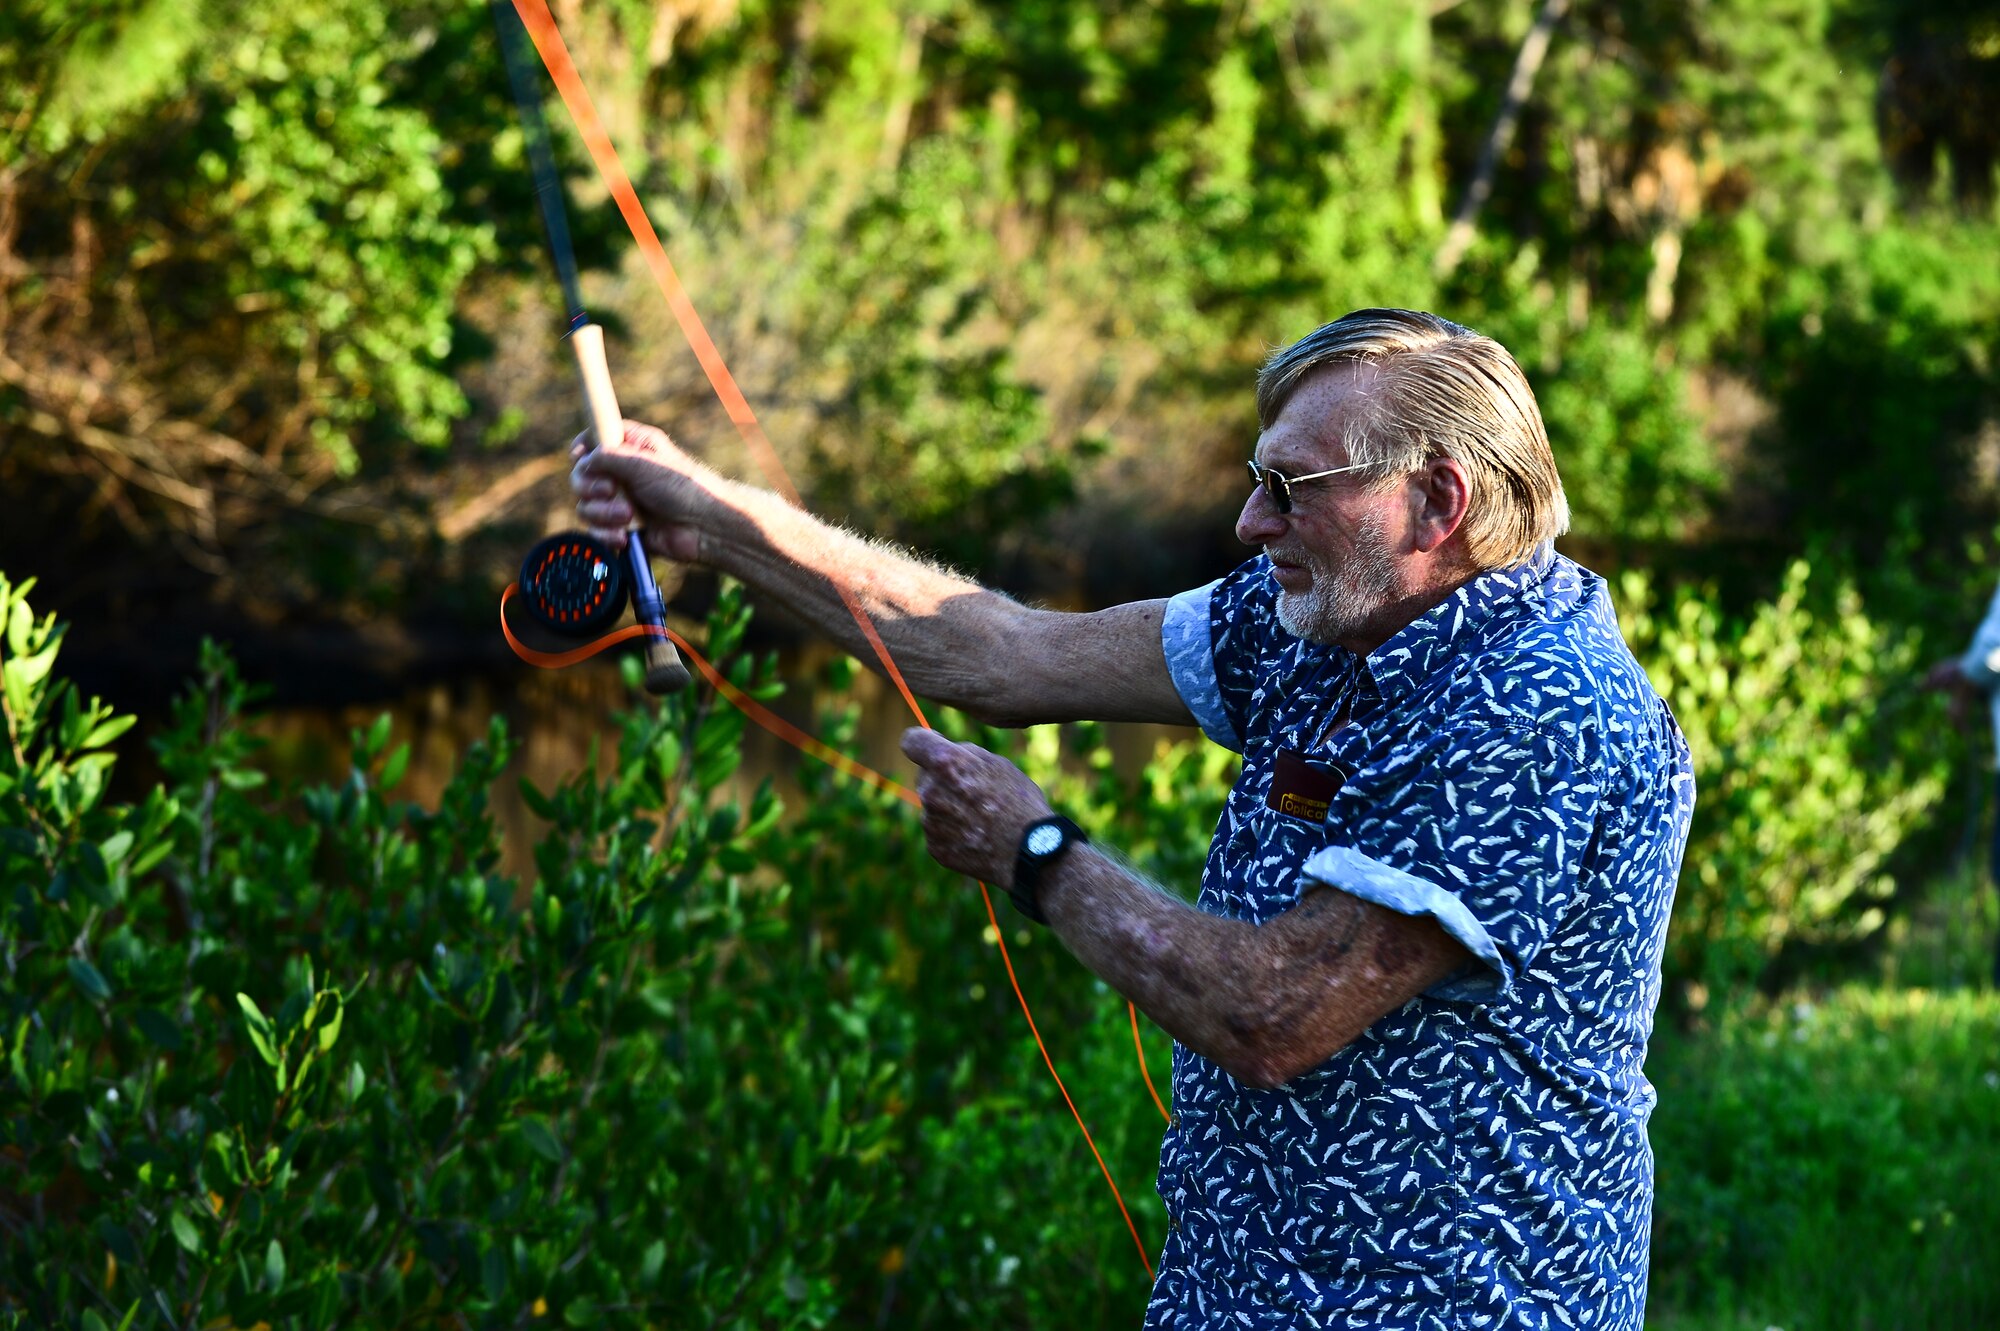 Stan Green, a Project Healing Waters Fly Fishing participant, practices casting during a class held at MacDill Air Force Base, April 17, 2014. Green is a Vietnam-era Navy veteran. (U.S. Air Force photo by Staff Sgt. Brandon Shapiro/Released)